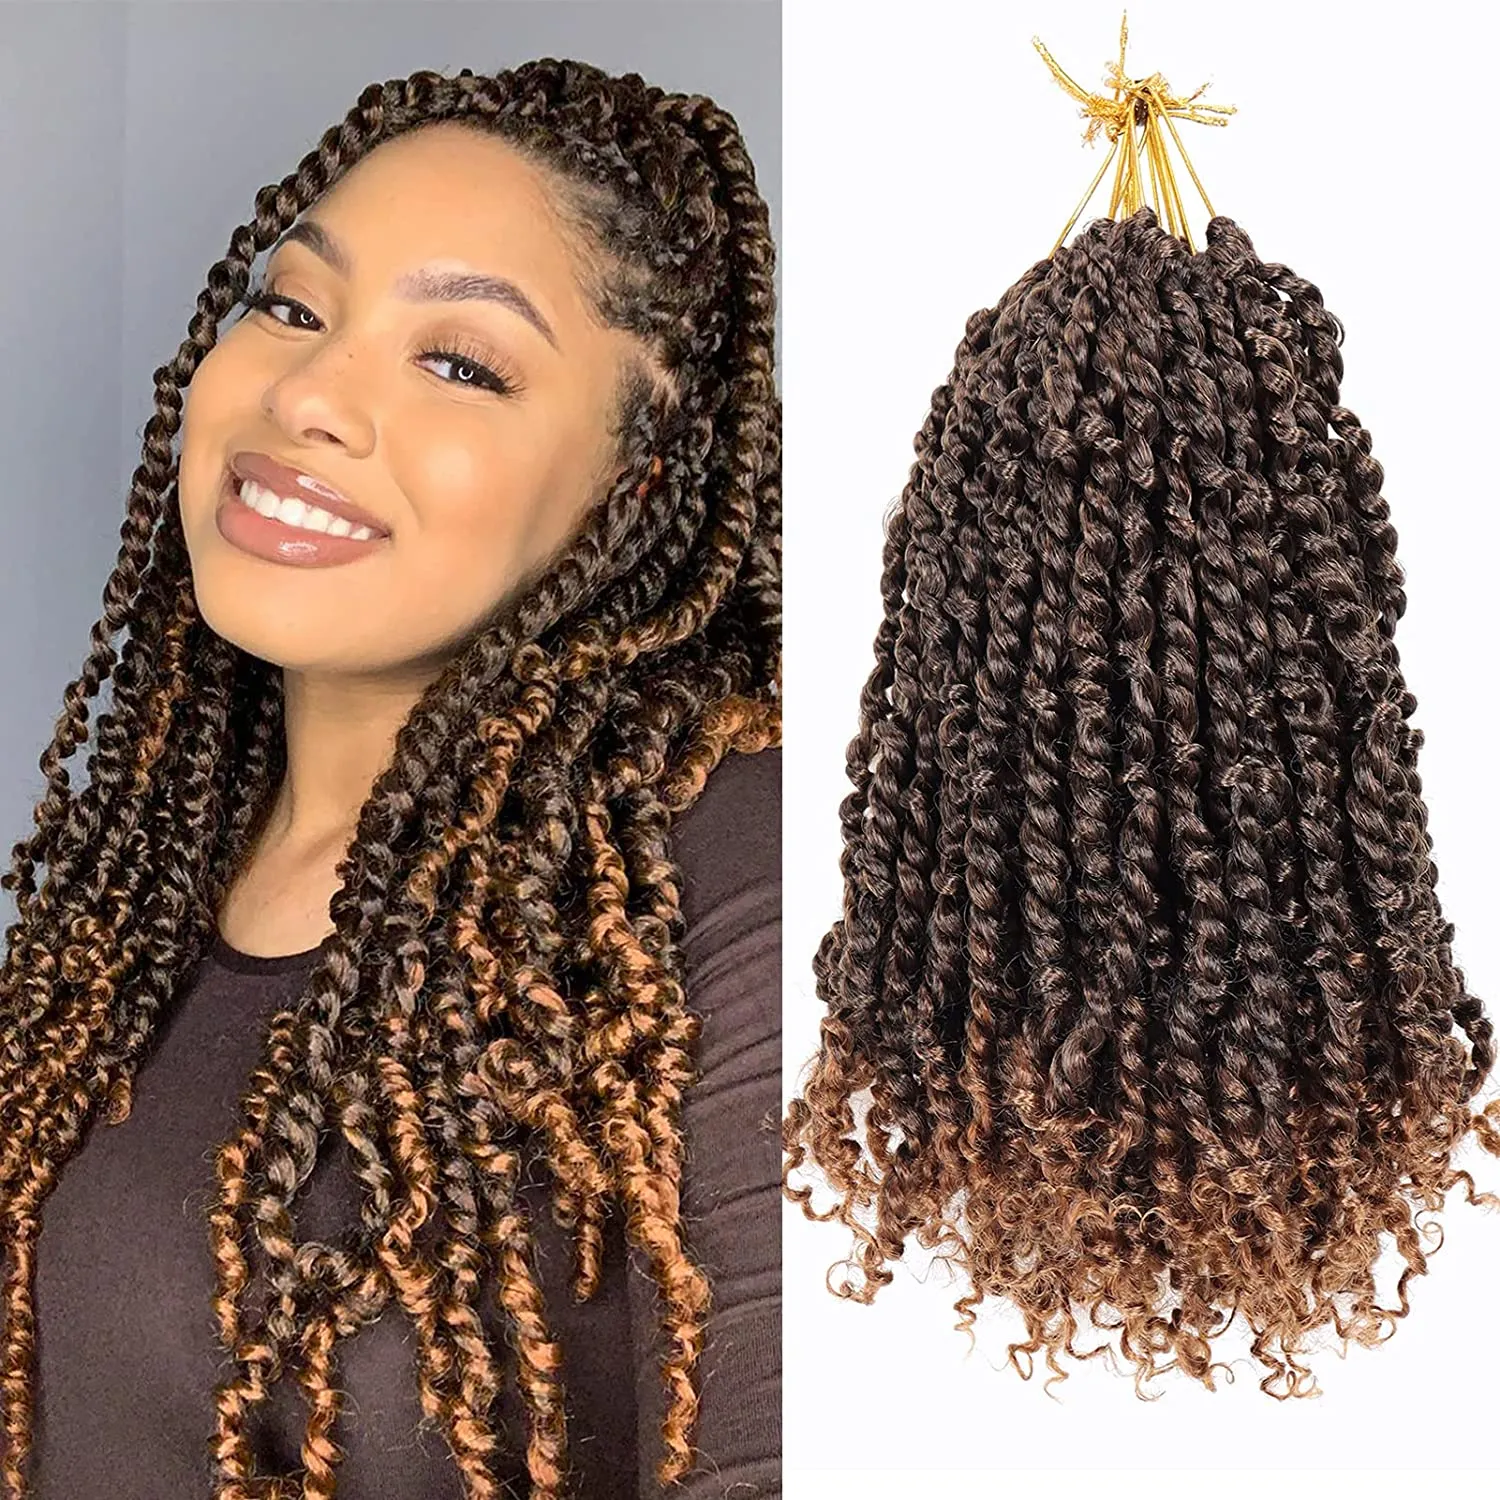 Water Wave Crochet Hair (Passion Twist) Can Be Used To Make These